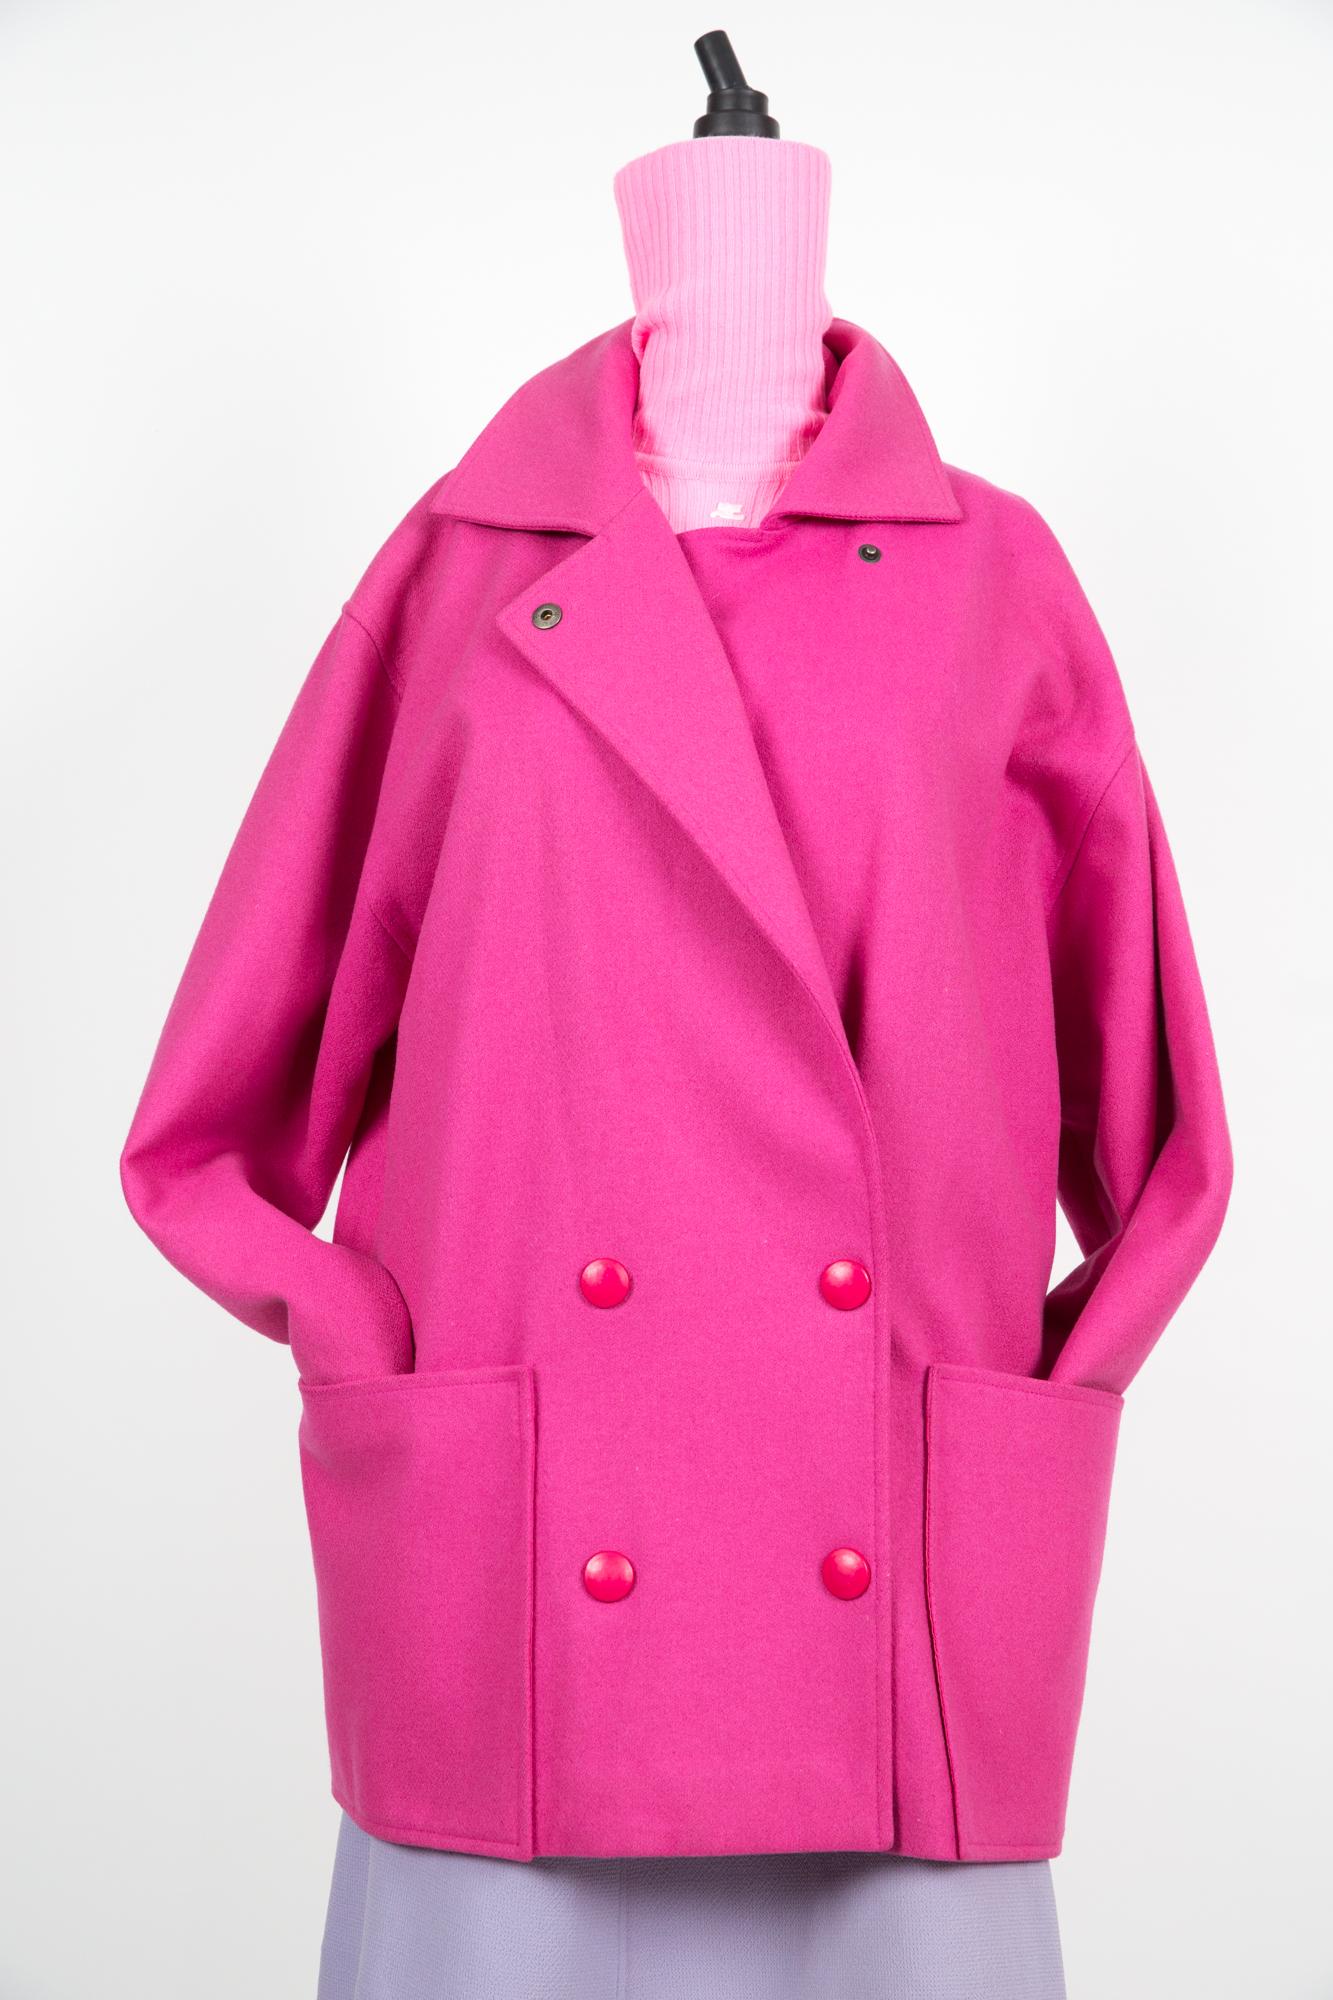 Pierre Cardin pink wool coat featuring a shocking pink color,  cocoon oversized shape, snaps opening, large front pockets and a full lining. 
Circa: 1980s
Virgin wool 95%
Polyamide 5%
In good vintage condition. Made in France.
( some small holes